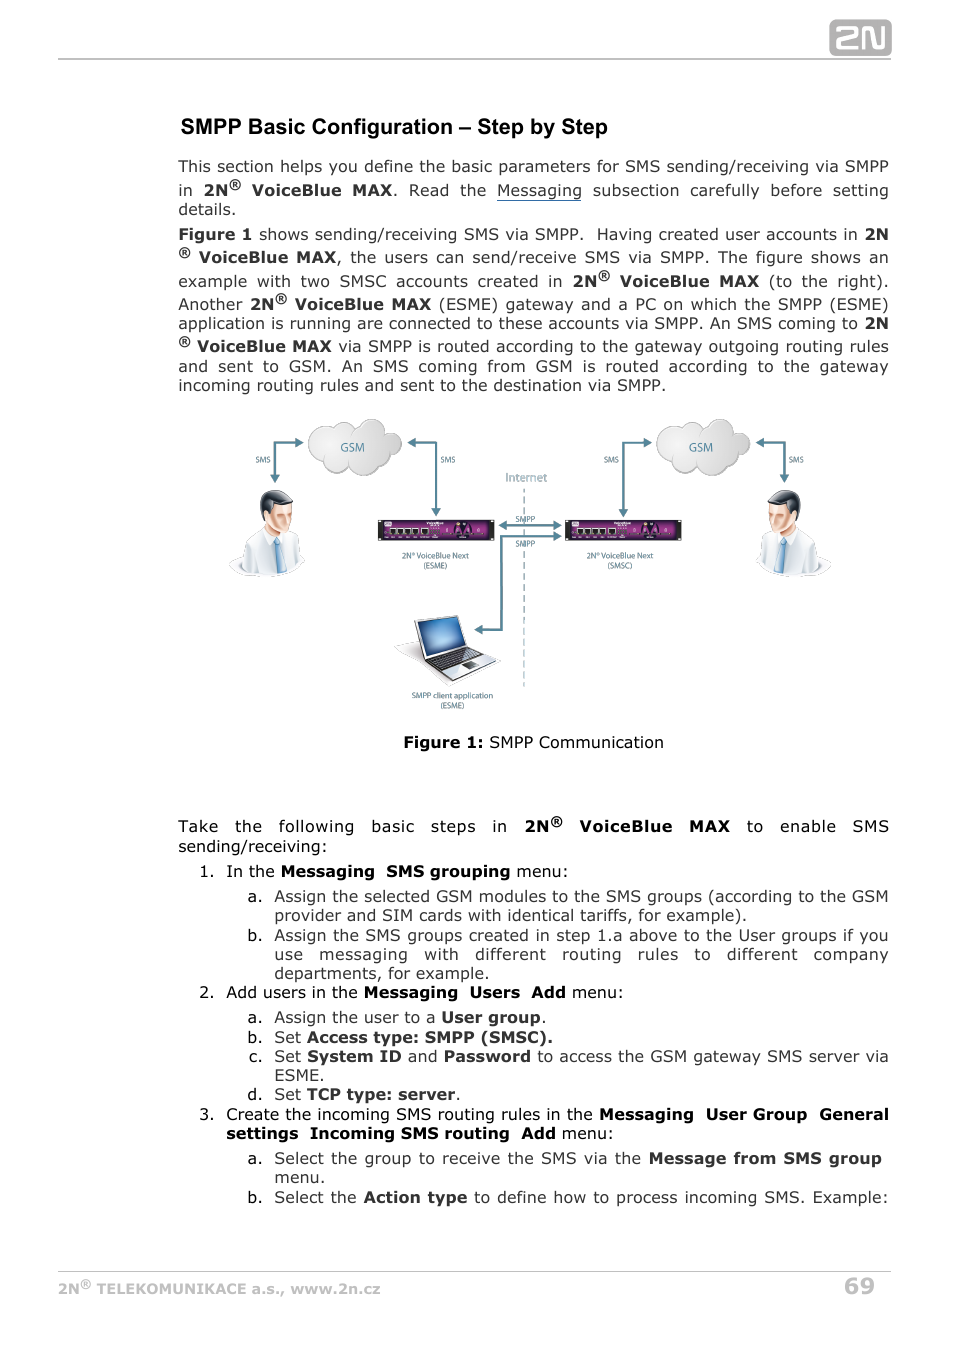 Smpp basic configuration – step by step | 2N VoiceBlue MAX v1.3 User Manual | Page 69 / 107